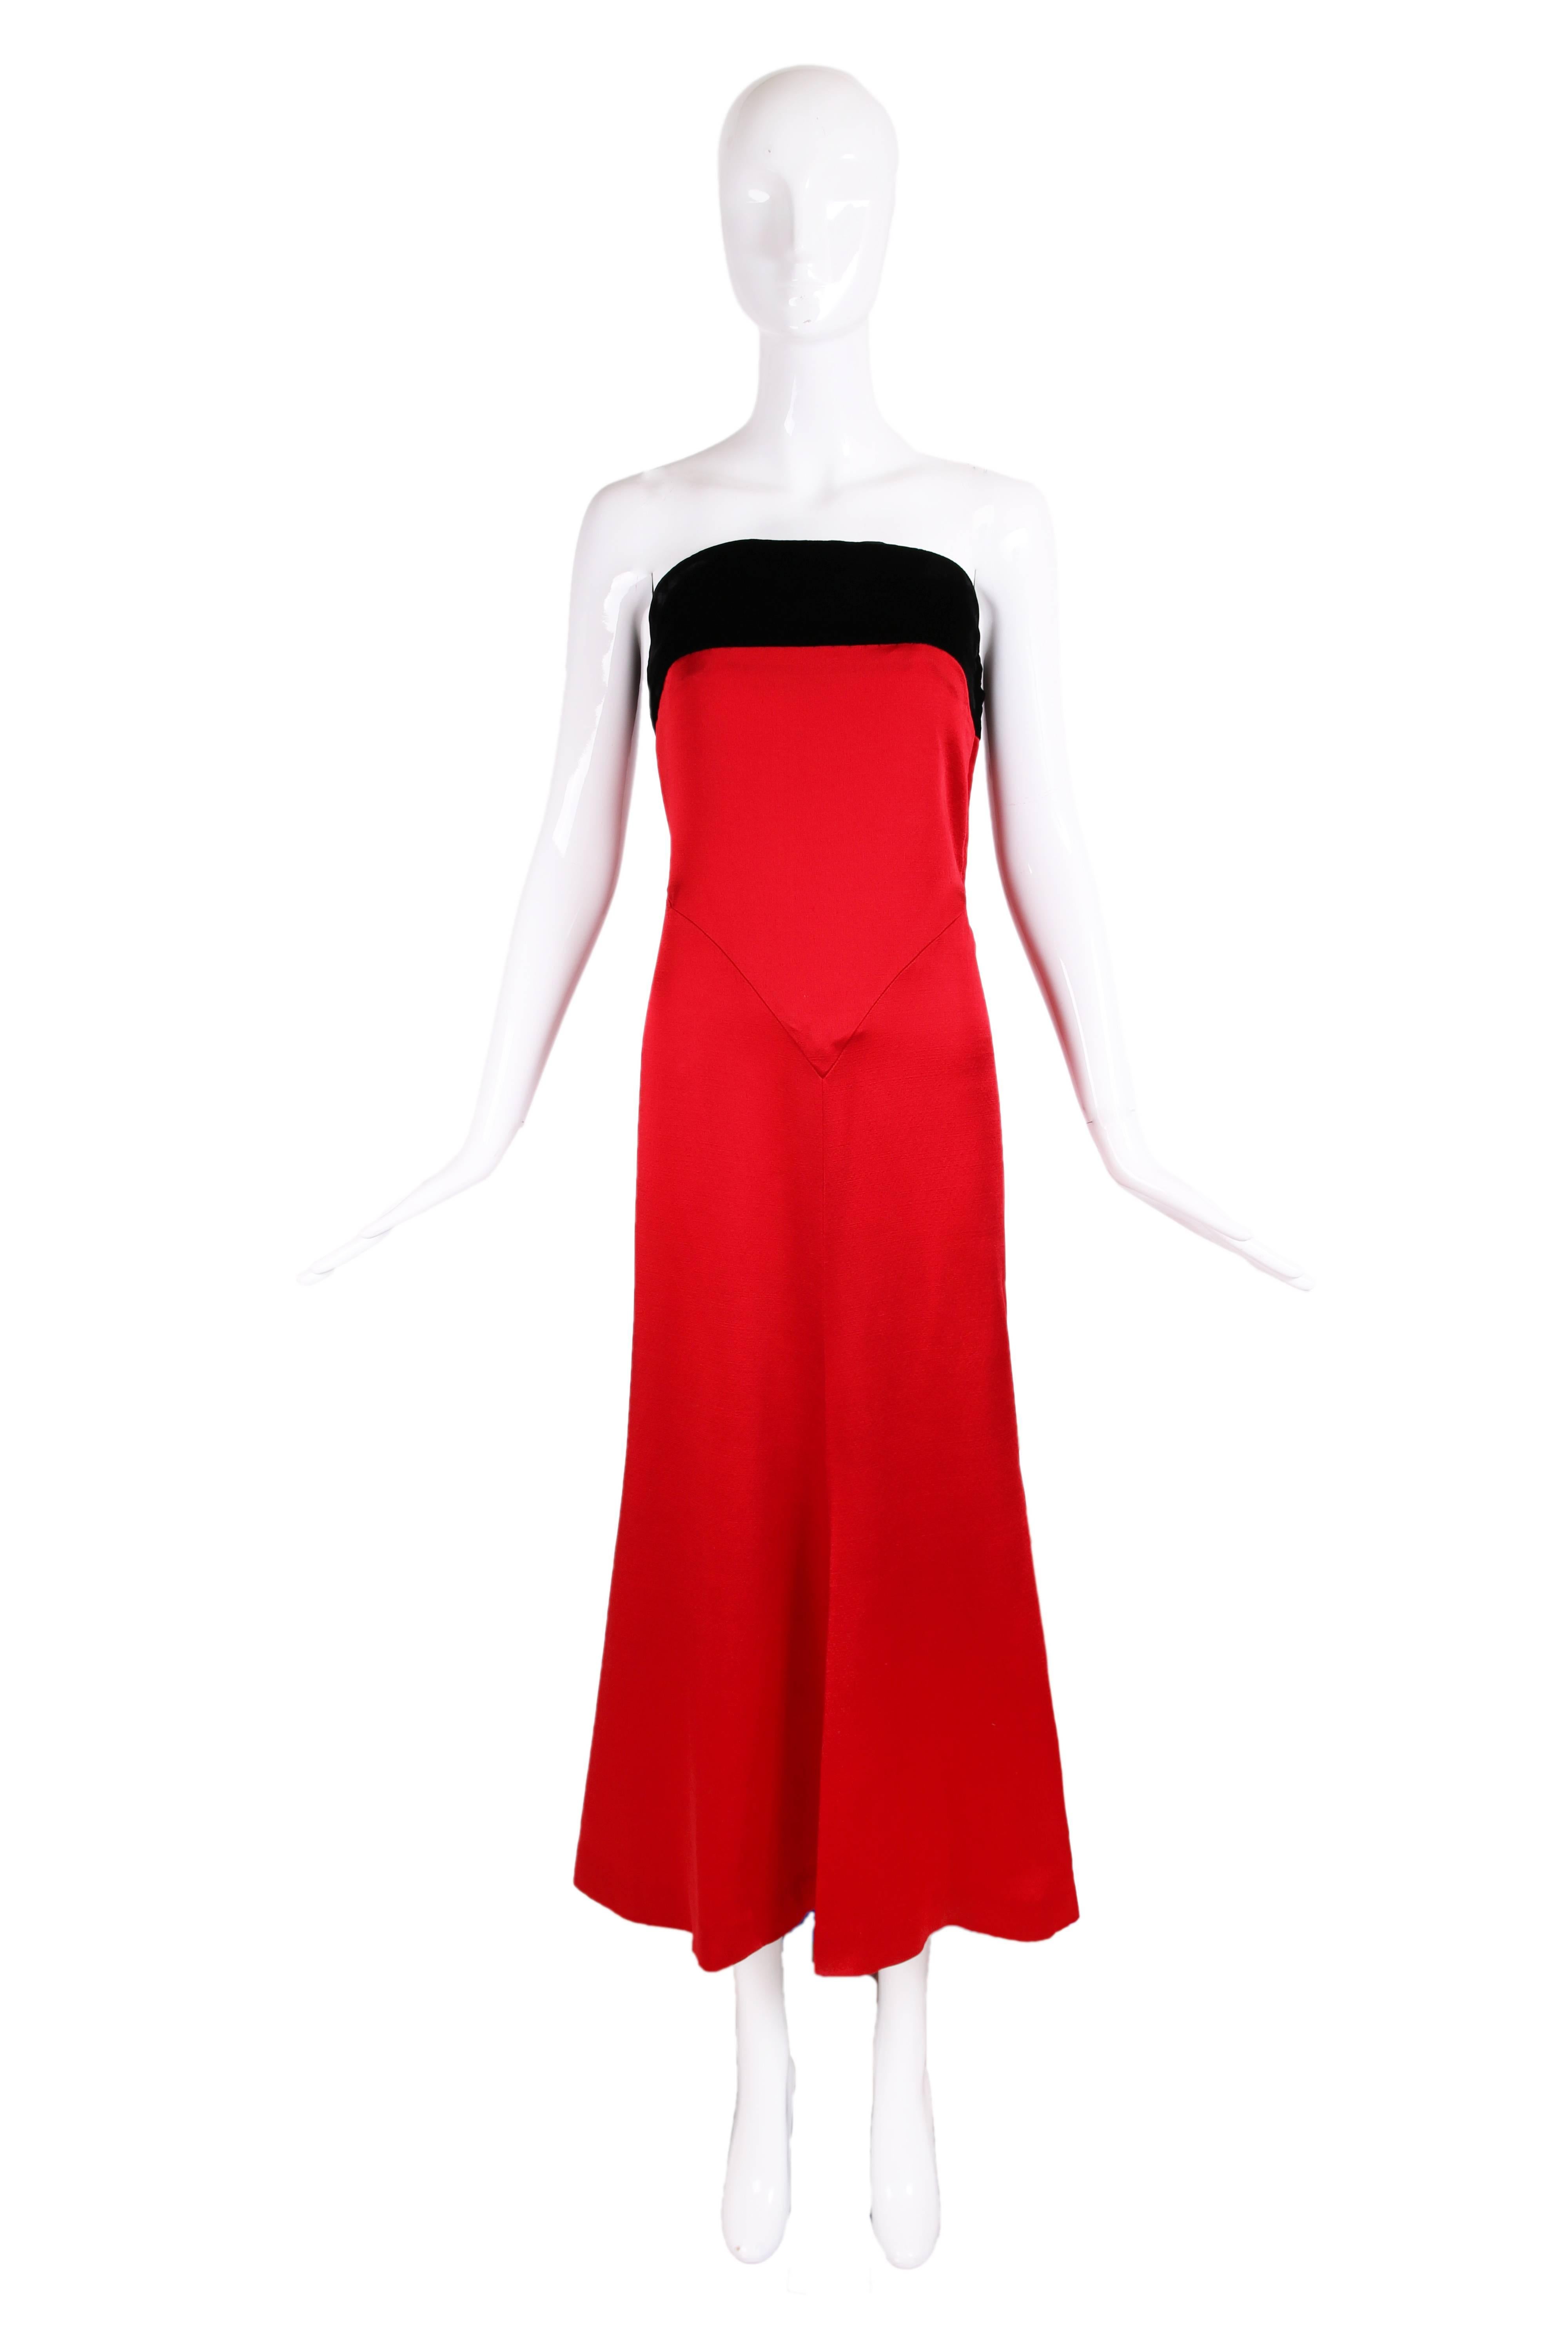 Yves Saint Laurent YSL red strapless gown with a black velvet band at the top of the bust. There is no fabric tag but fabric is silky with a satin sheen. Size tag 40 but dress appears to have been altered at the bust as well as the hem so please